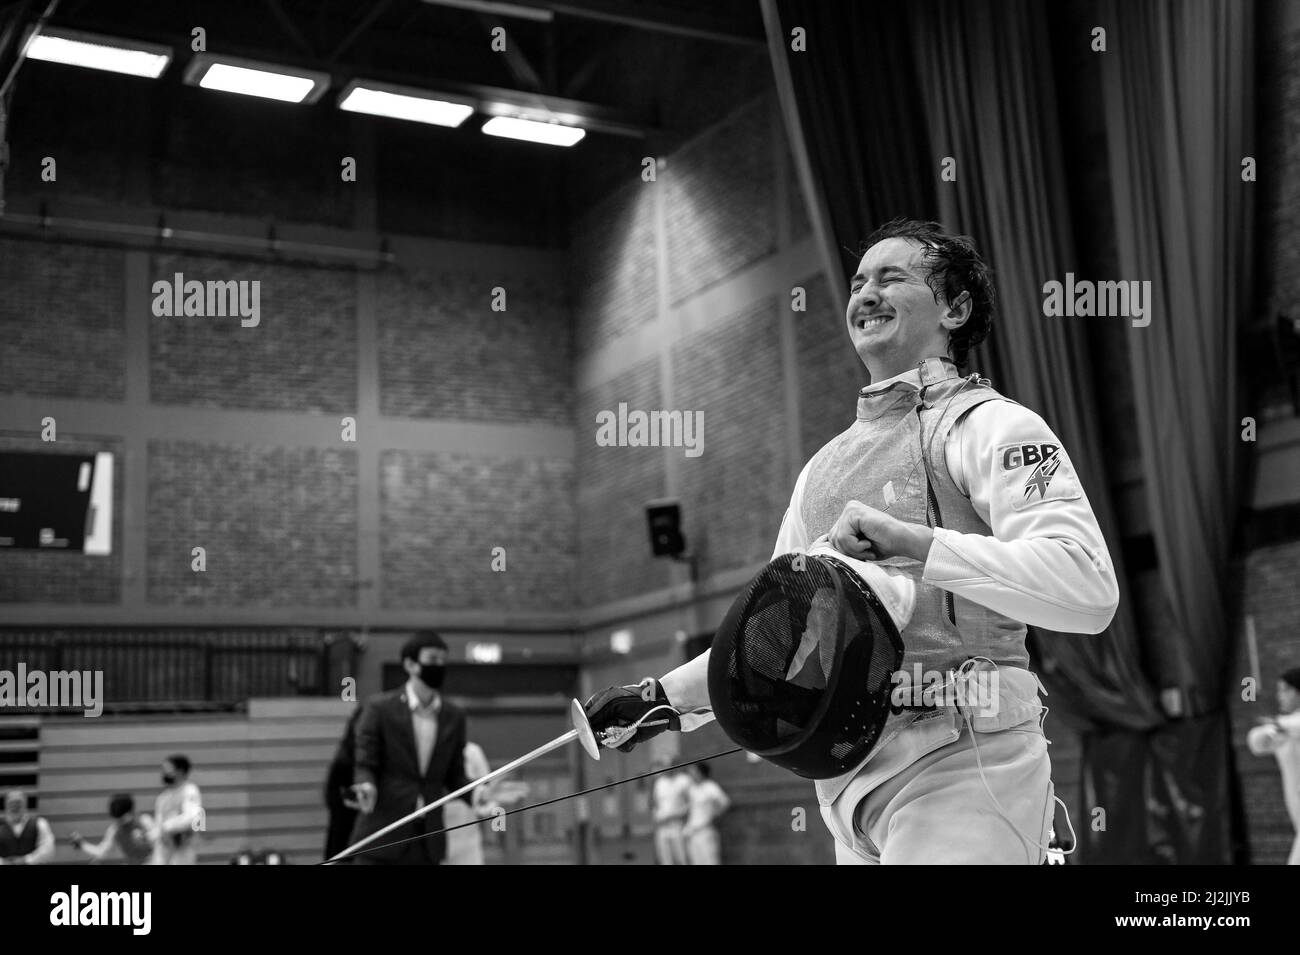 Fencing Foil Action Stock Photo